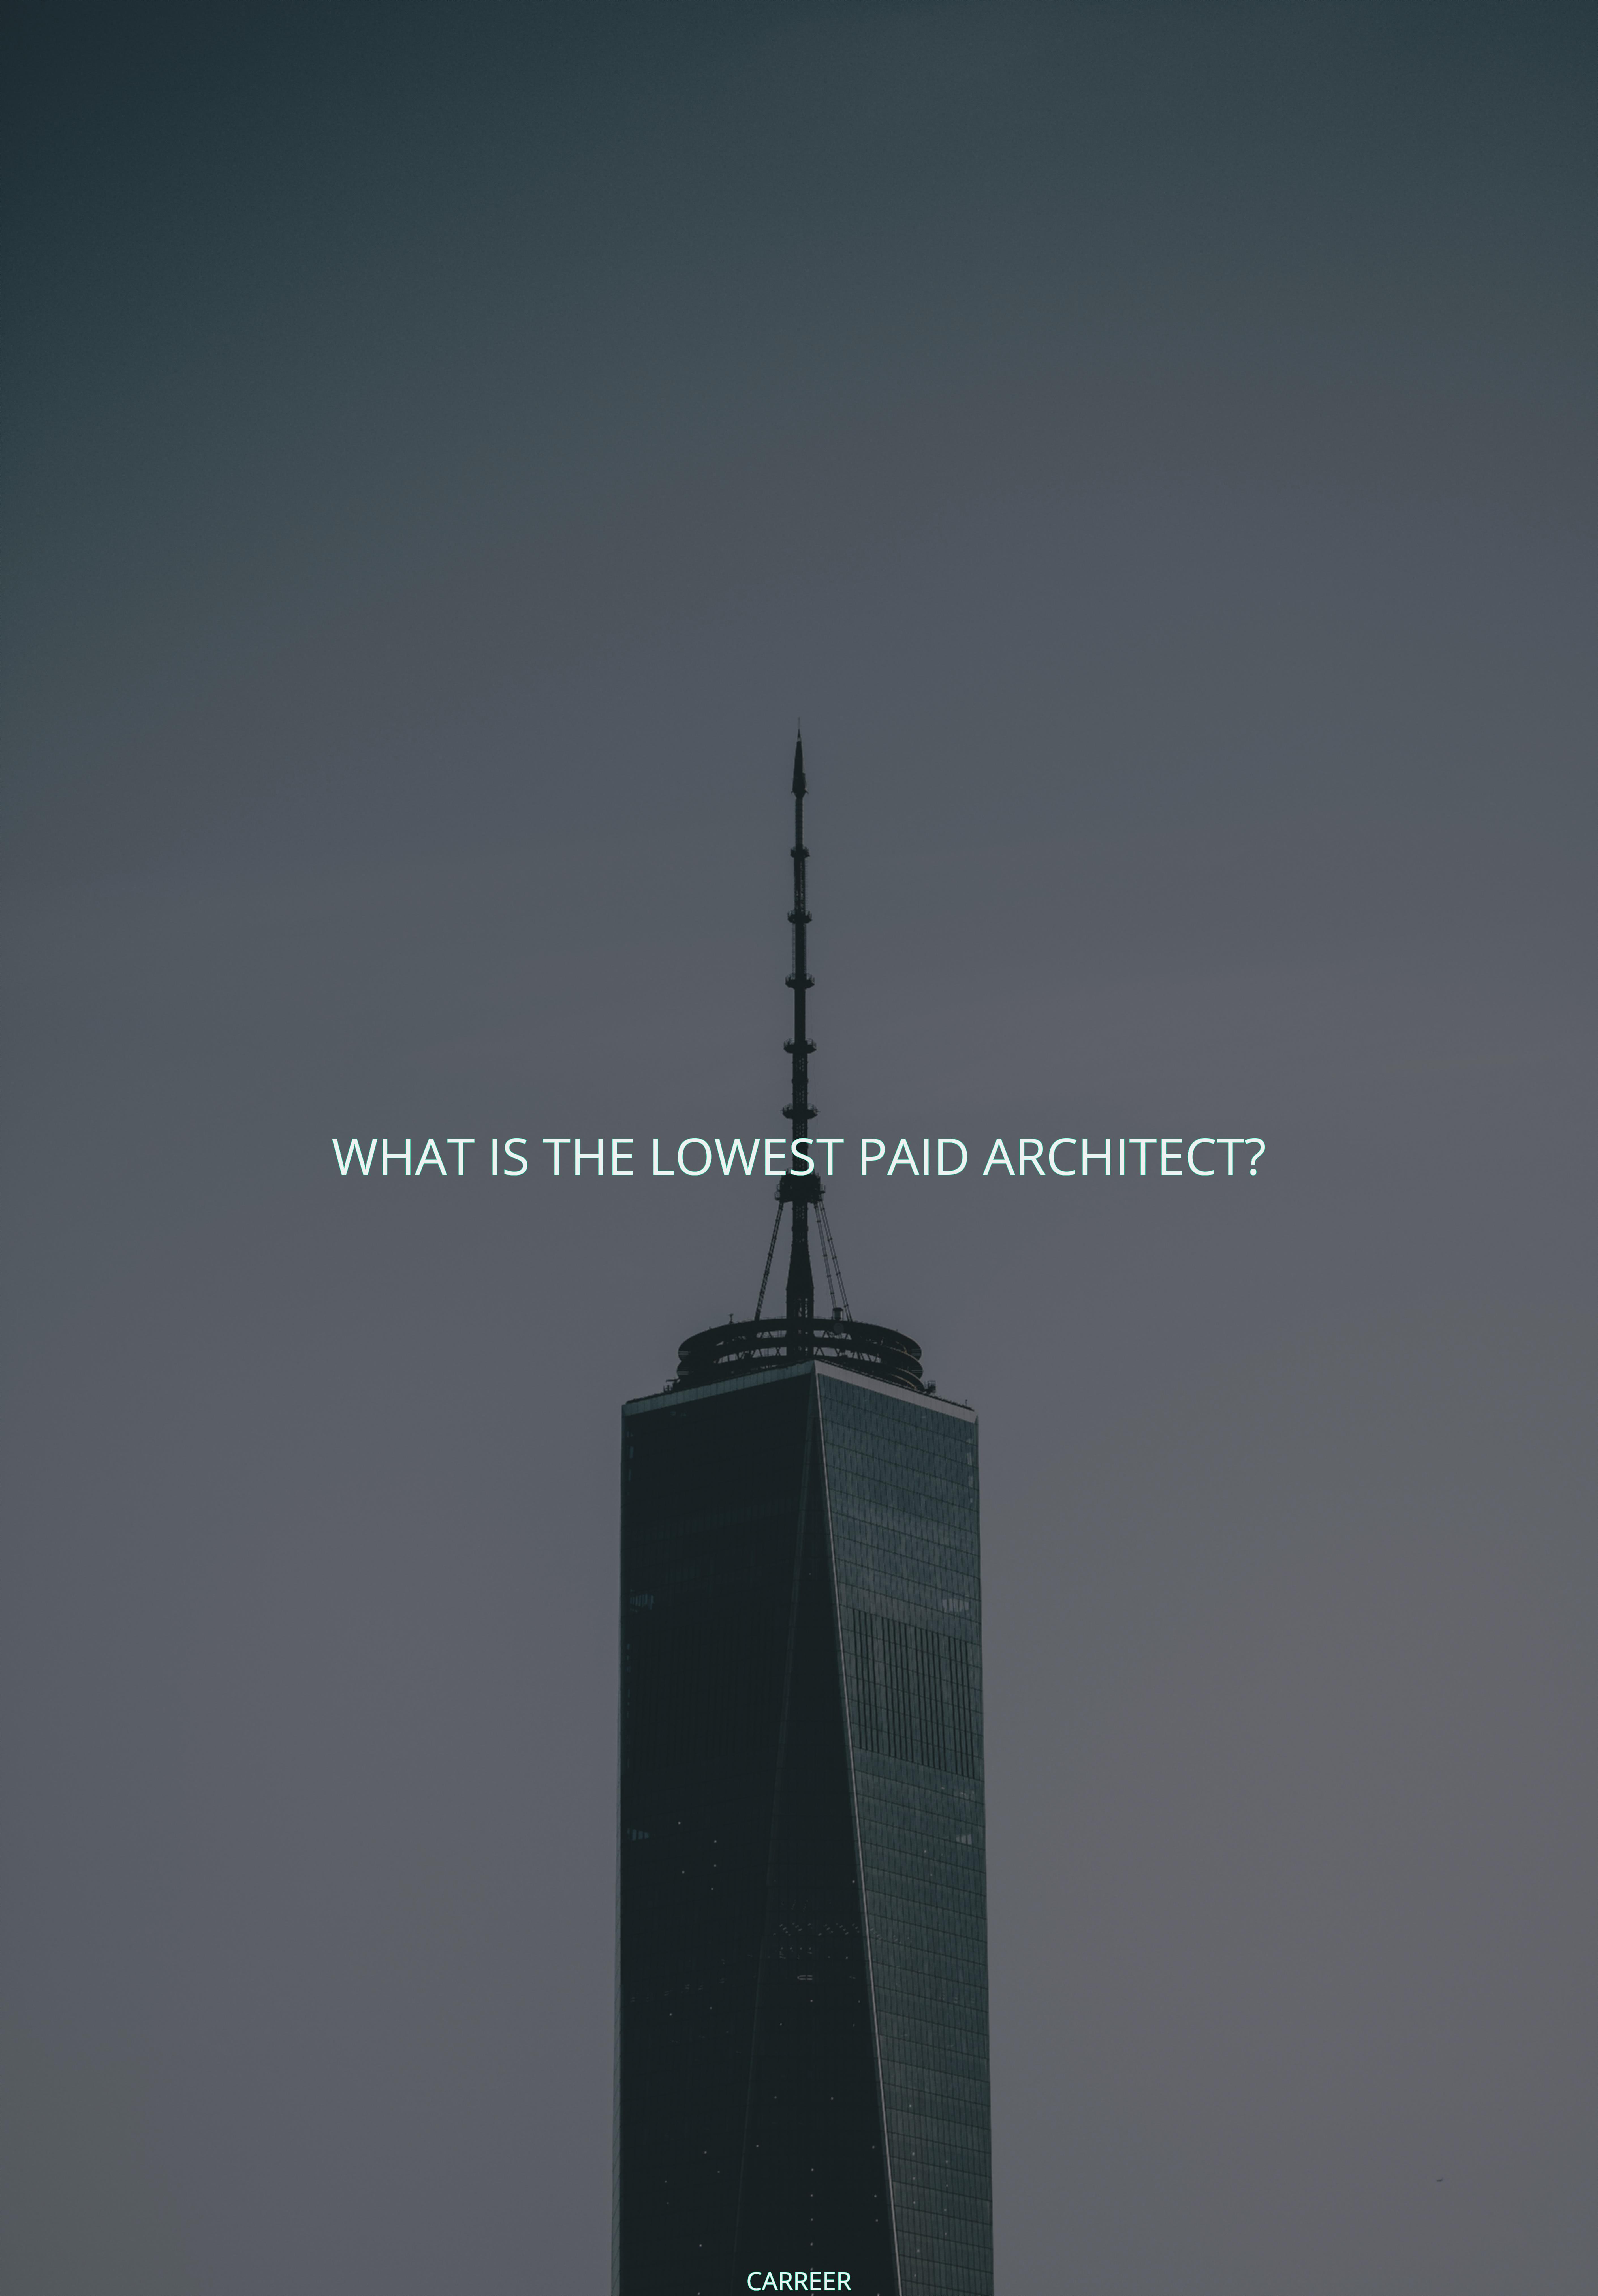 What is the lowest paid architect?